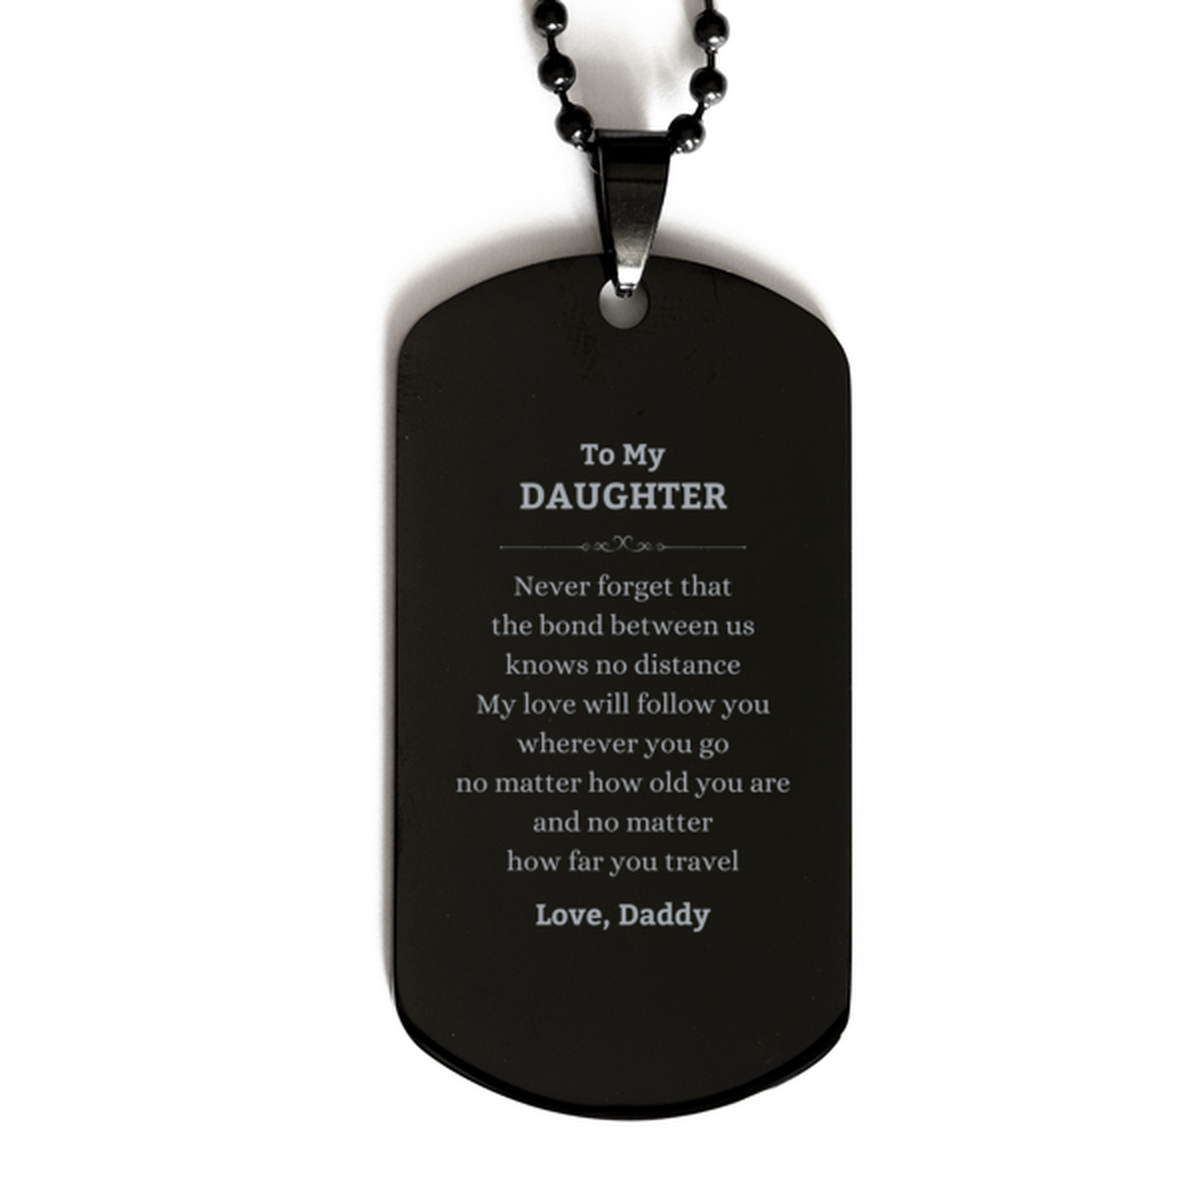 Daughter Birthday Gifts from Daddy, Adjustable Black Dog Tag for Daughter Christmas Graduation Unique Gifts Daughter Never forget that the bond between us knows no distance. Love, Daddy